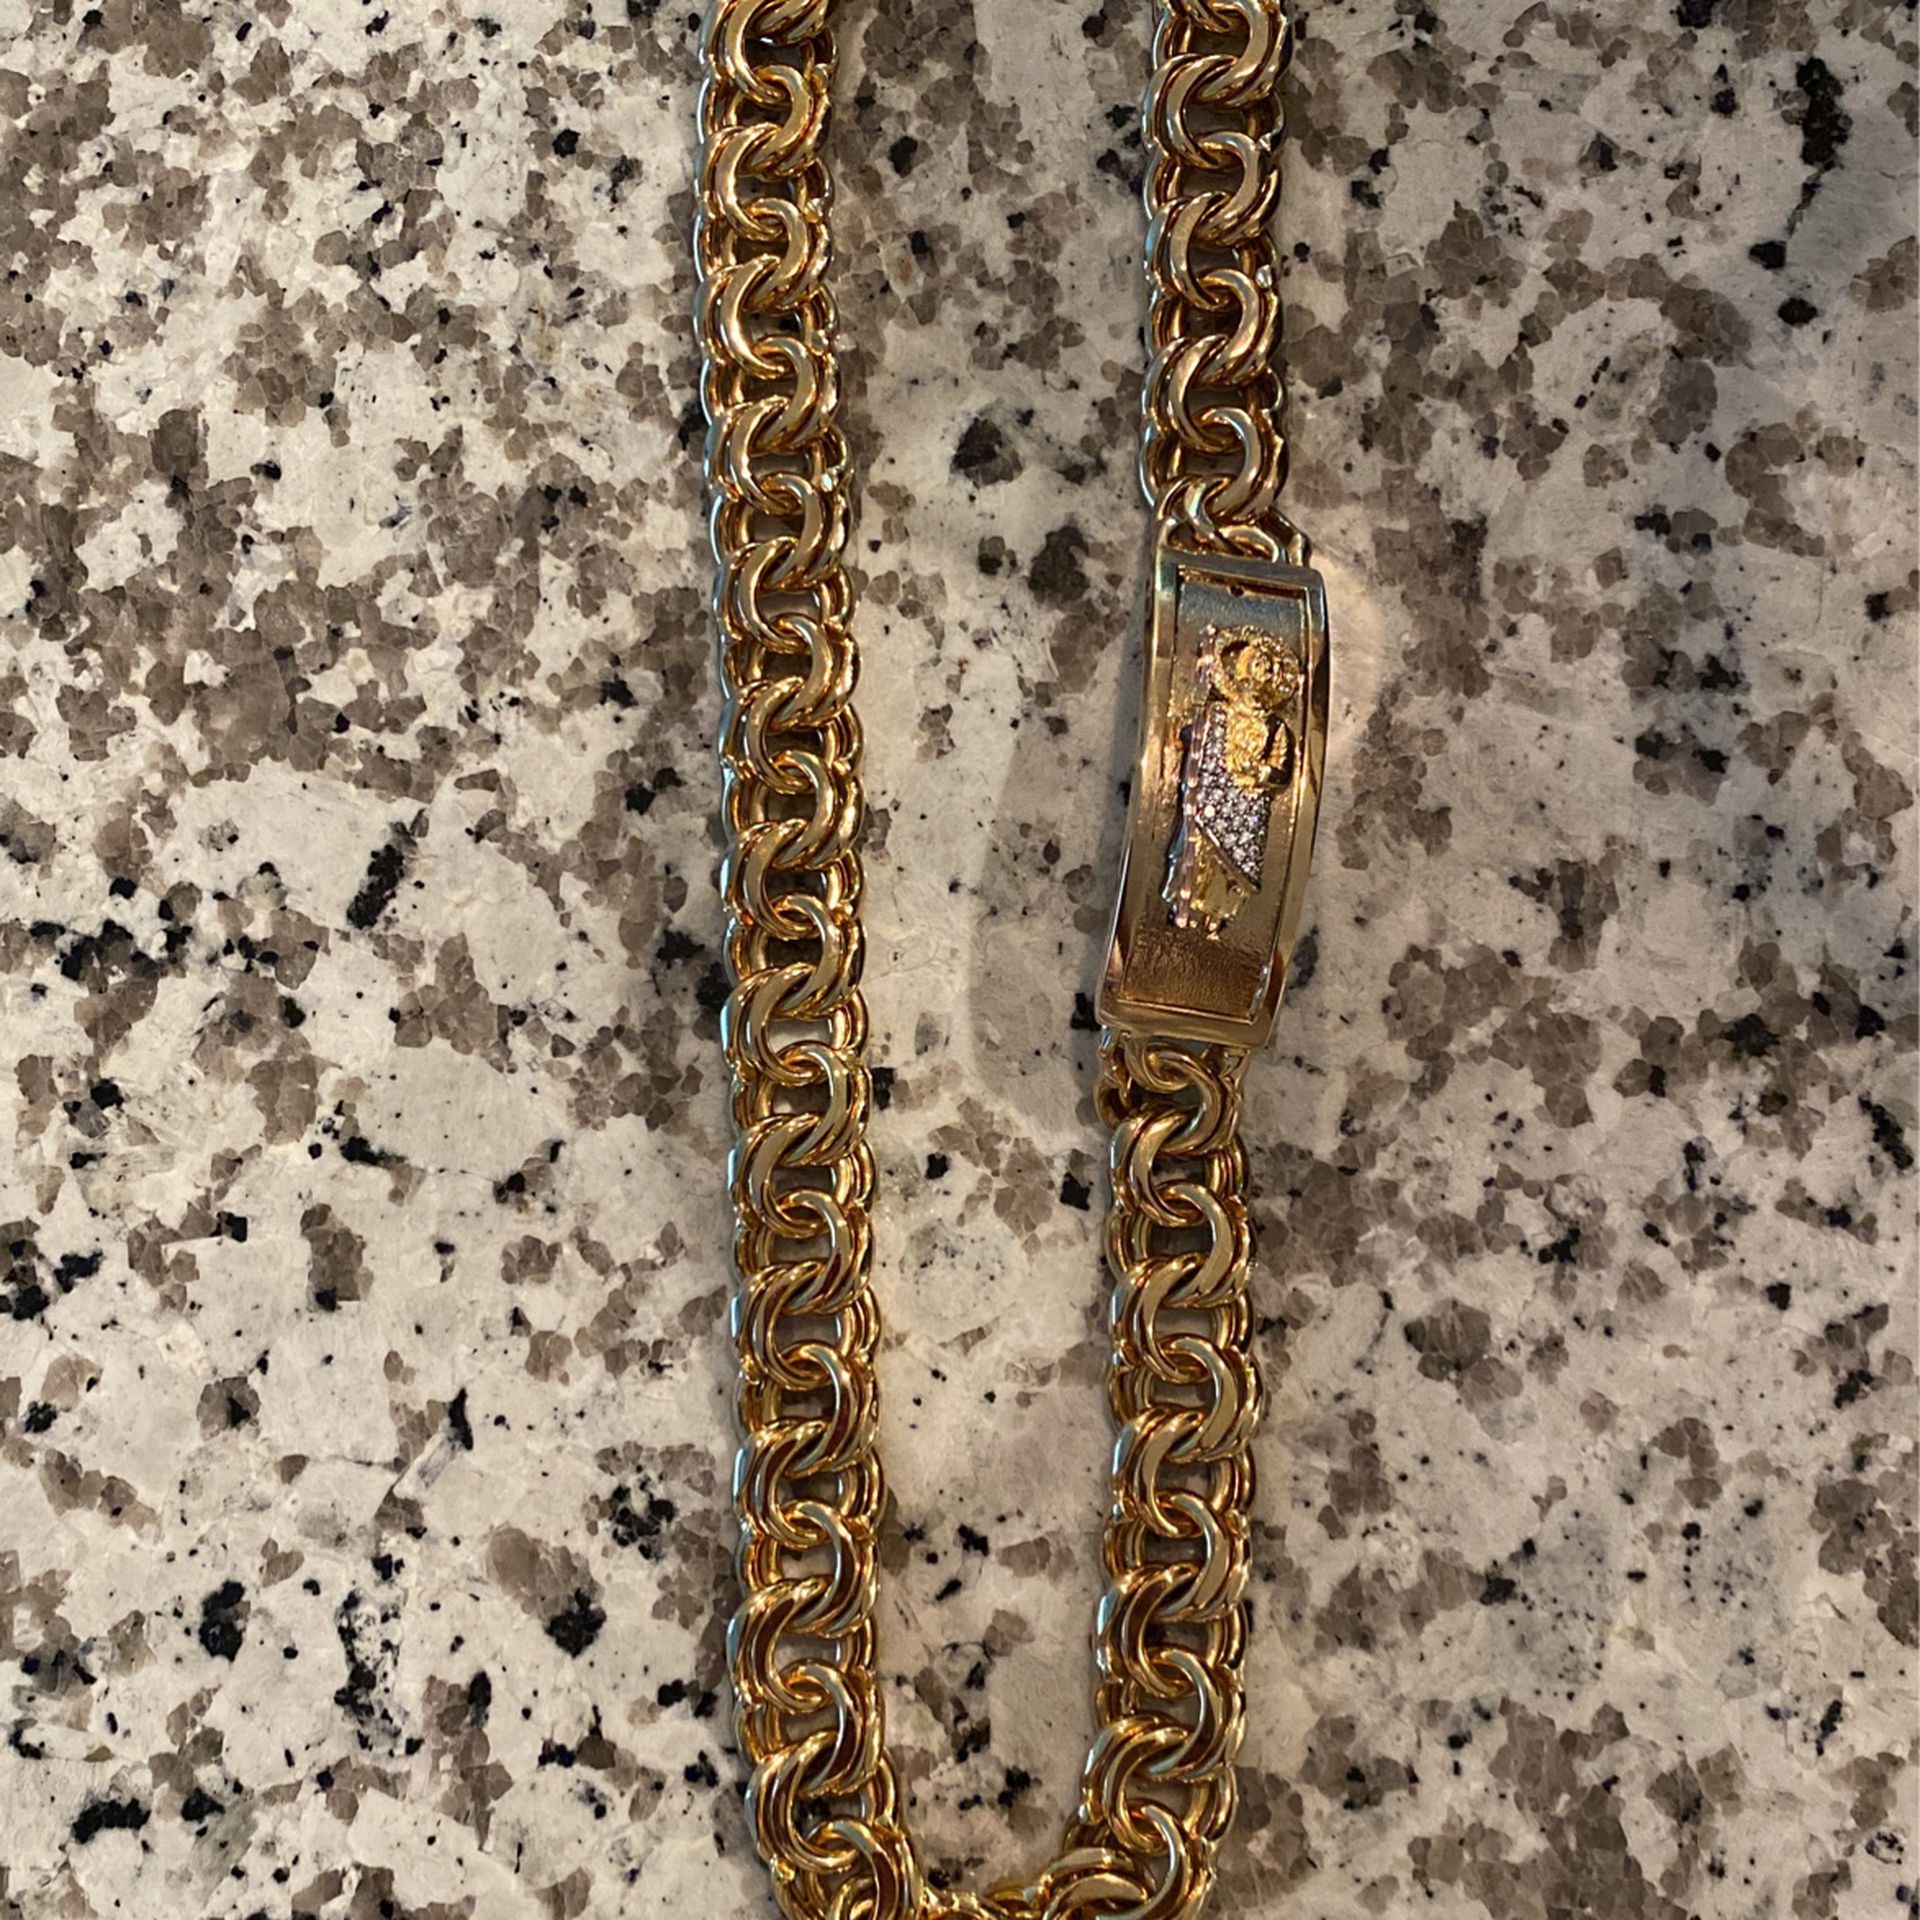 Chino Link Necklace 273 Grams 